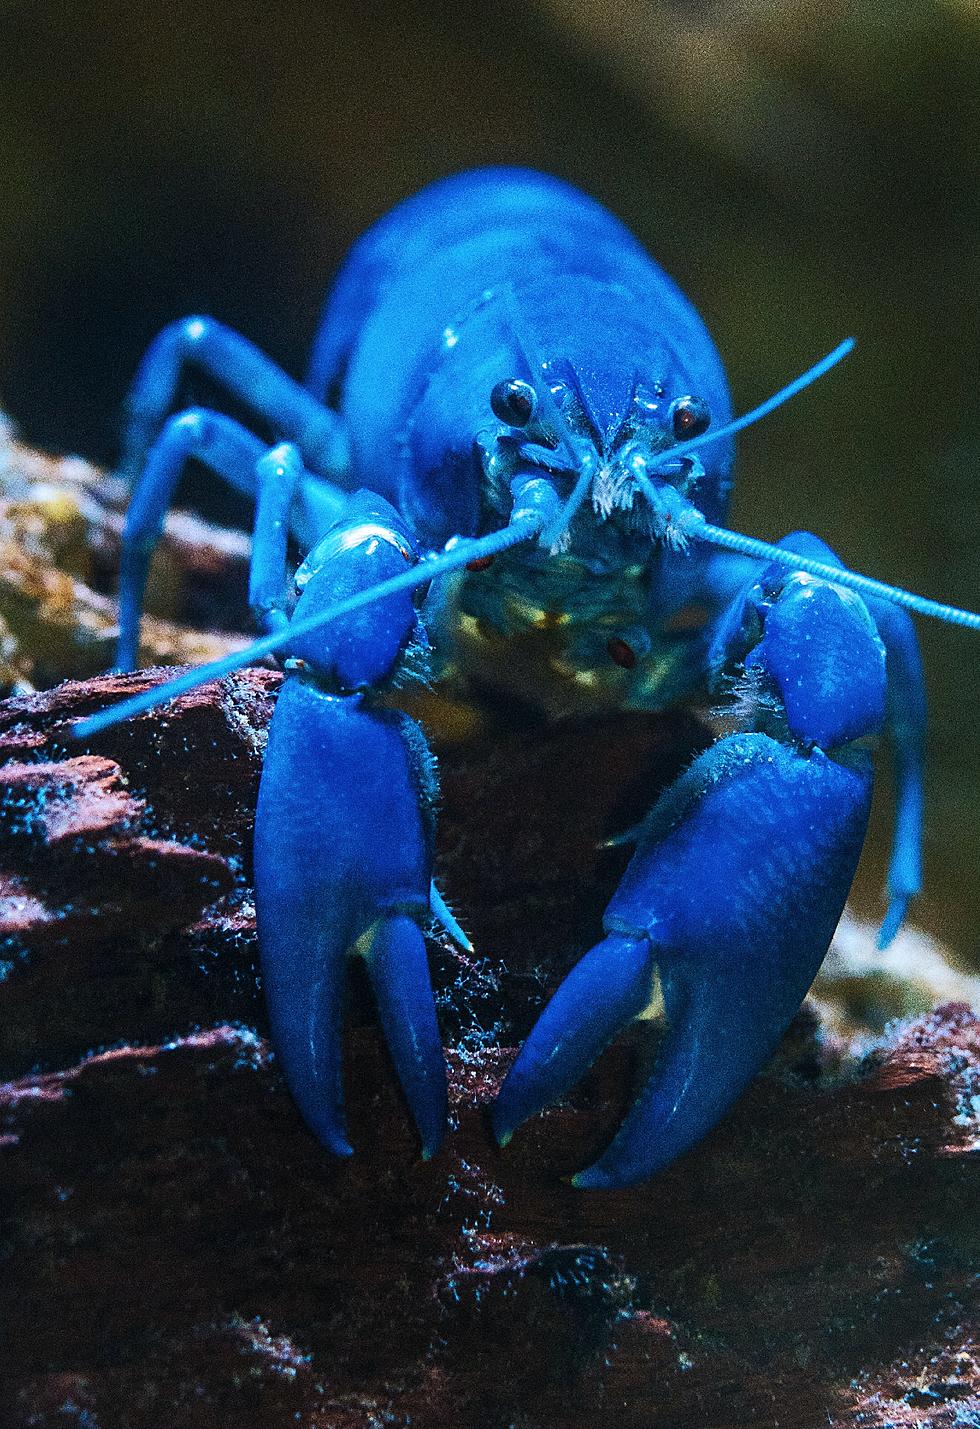 Super Rare Blue Lobster Seems to Glow!  Caught off Maine Coast